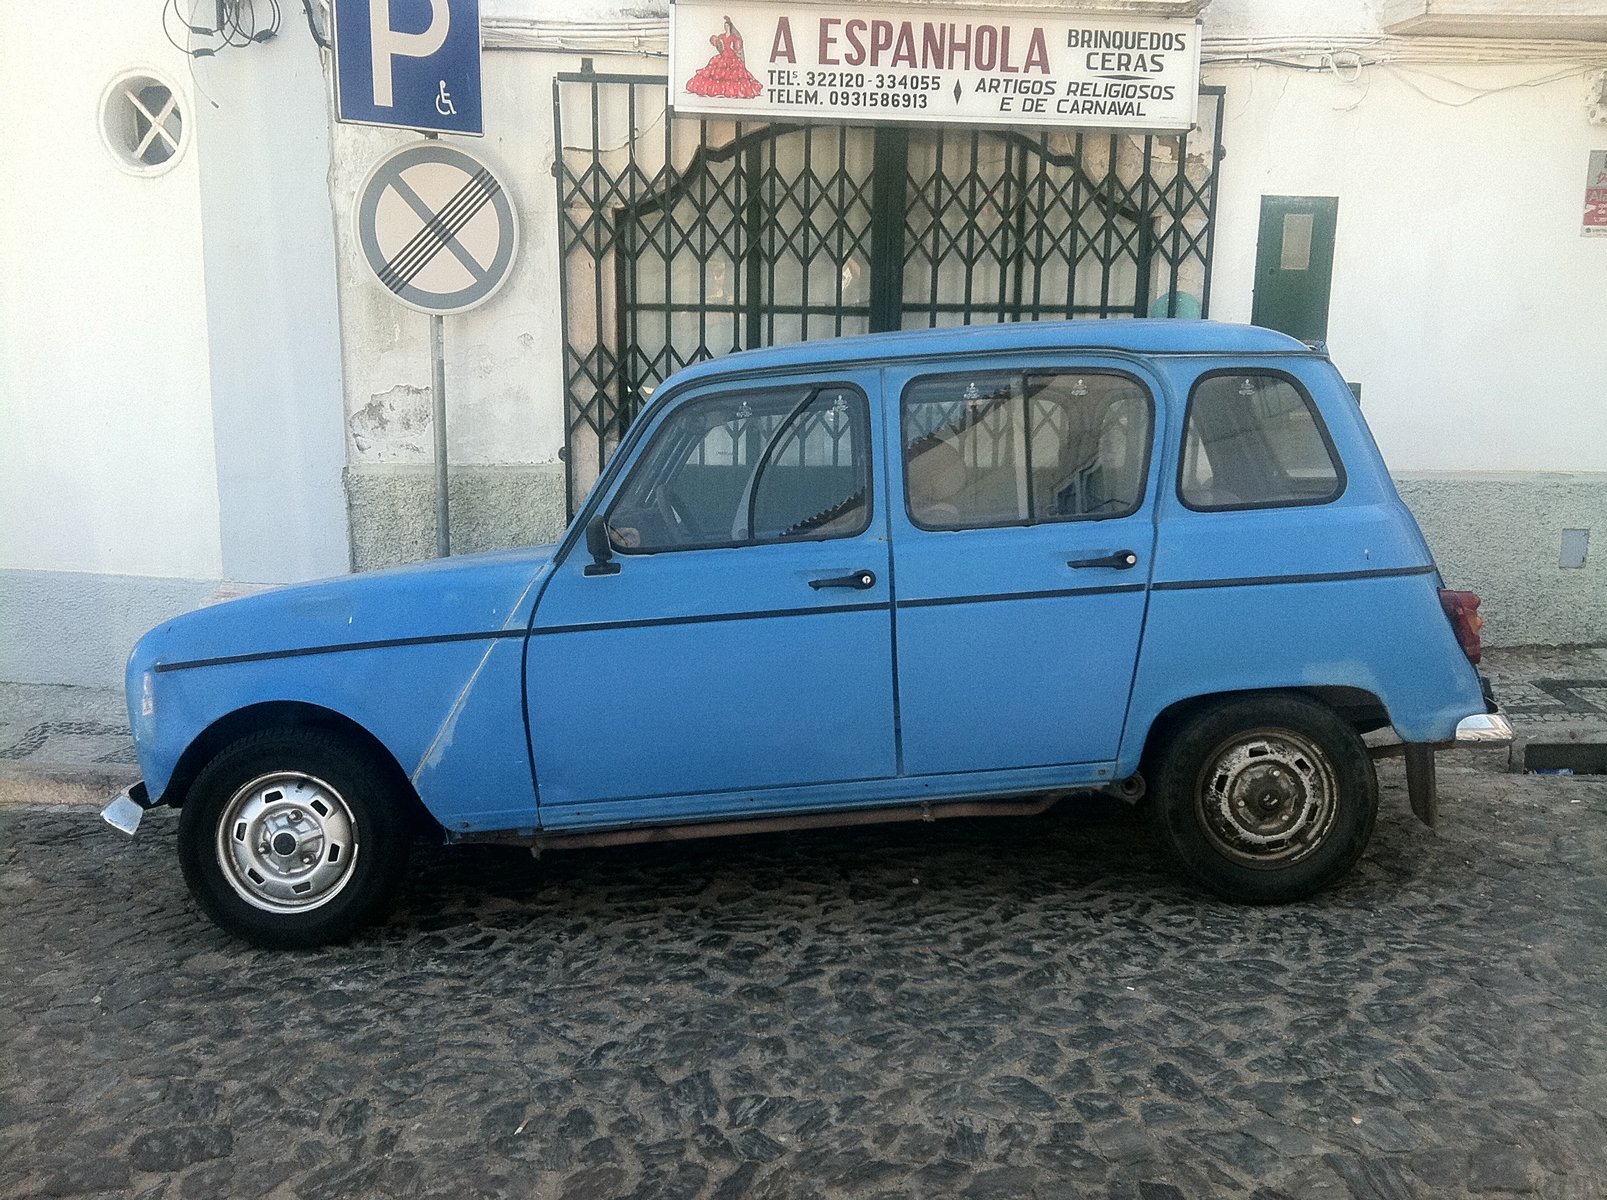 A blue car parked on a cobbled street with white walls, a metal gate and signs.